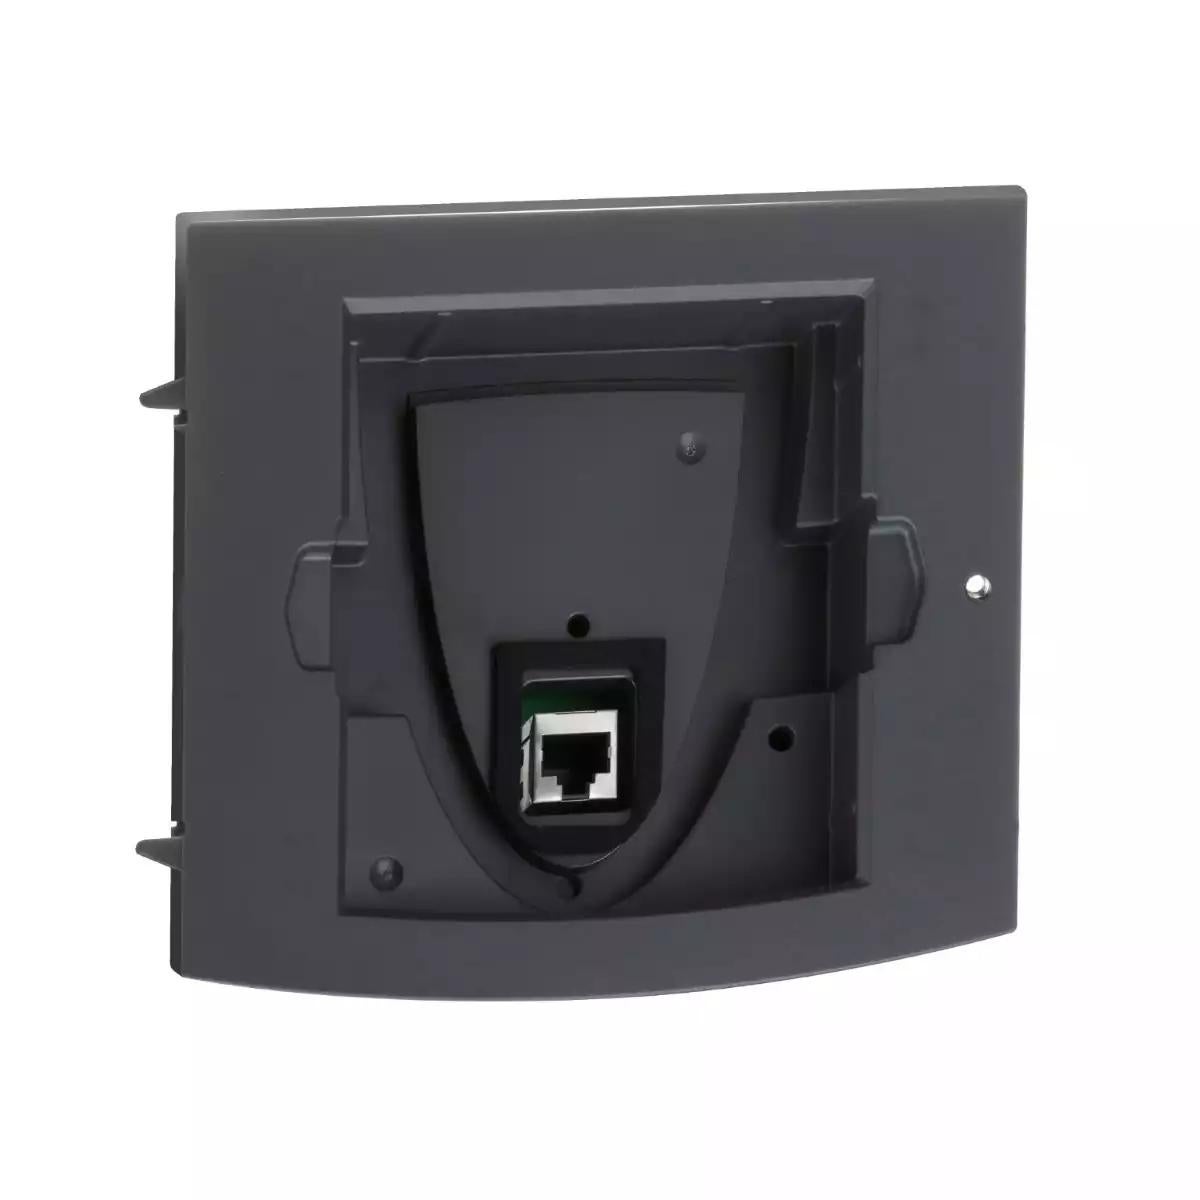 Schneider Electric Altivar 71 door mounting kit - for remote graphic terminal - variable speed drive - IP54